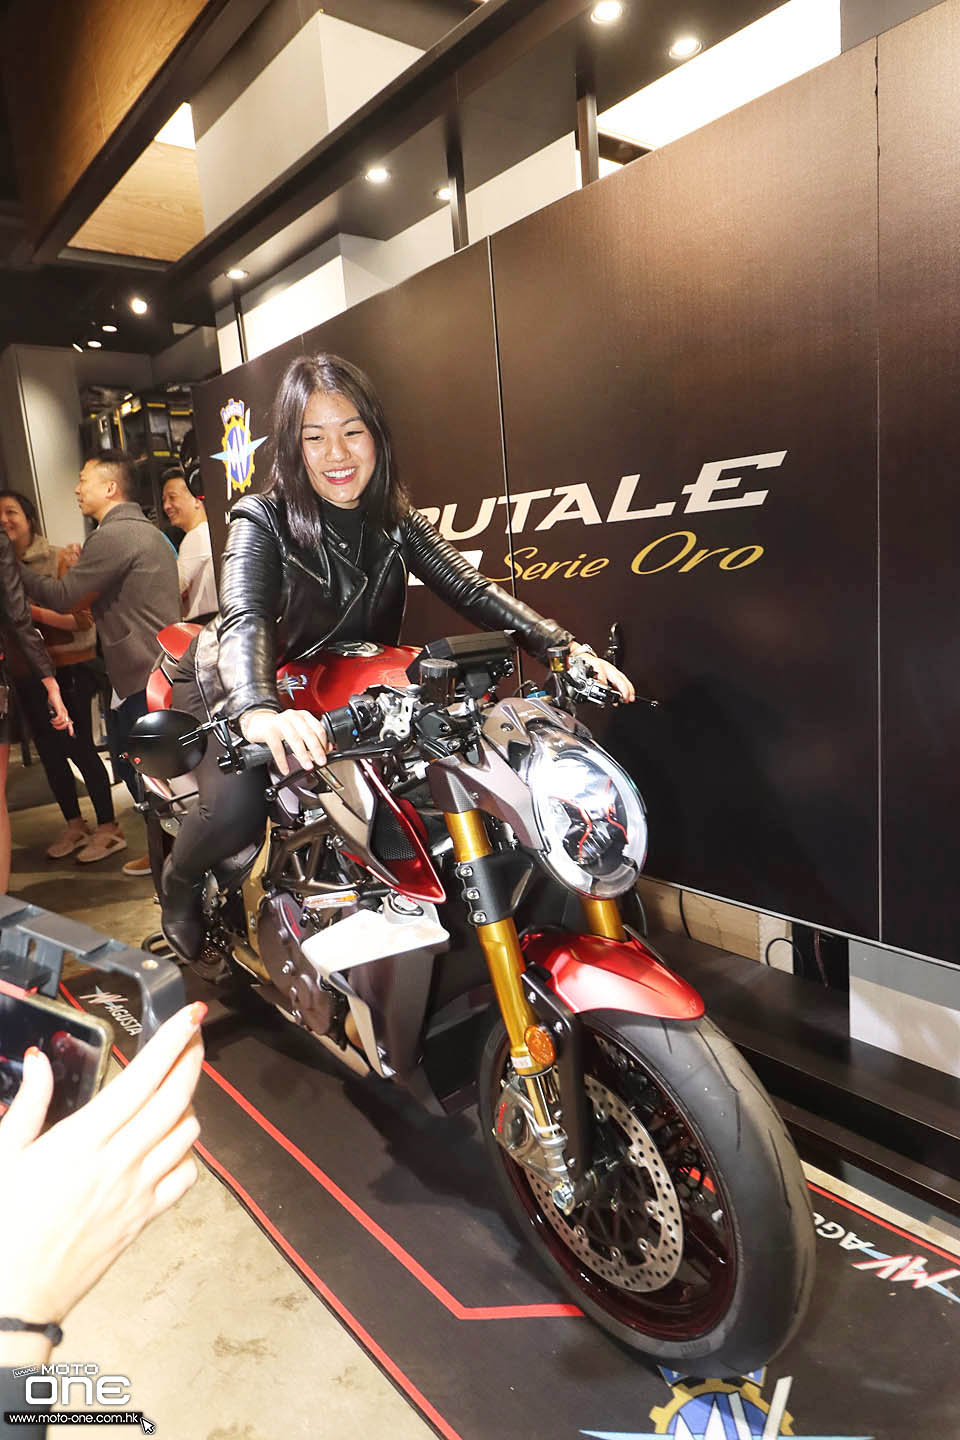 2020 MV Agusta Brutale 1000 Serie Oro Launch Party